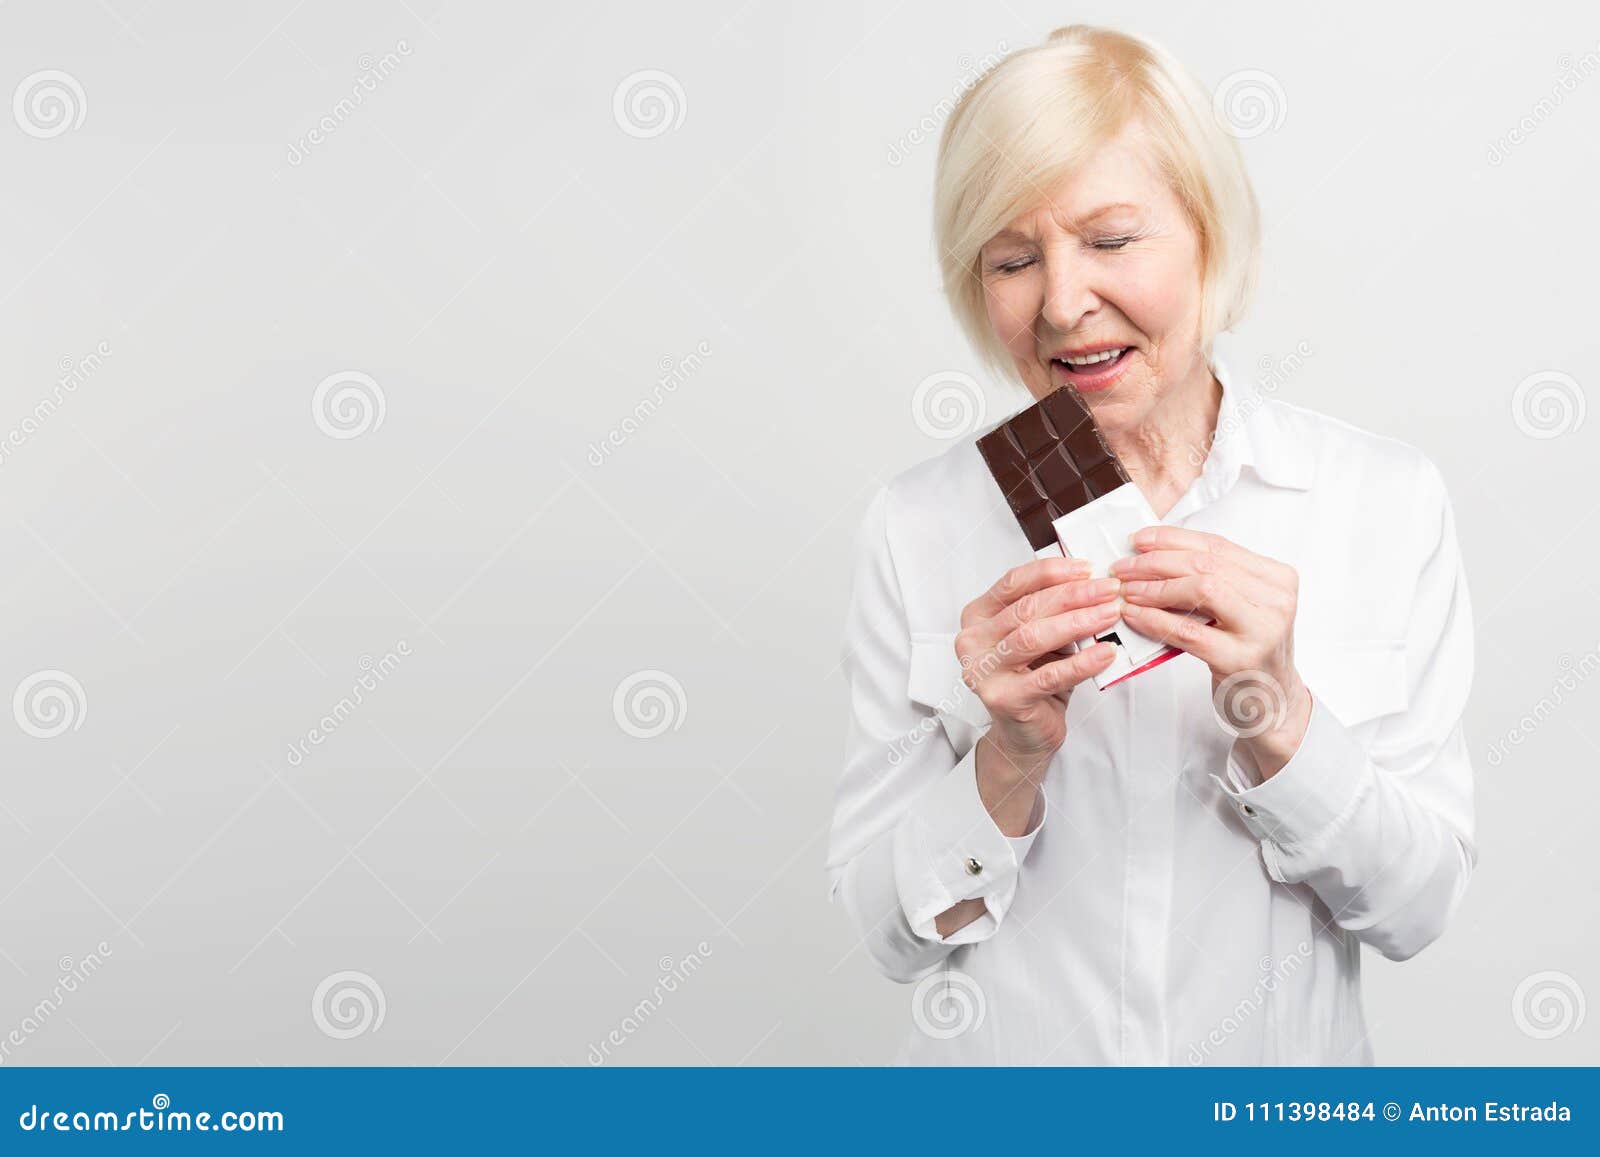 a picture of mautre lady eading a bar of milk chocolate. she likes to eat sweets. she cares about her health a lot but